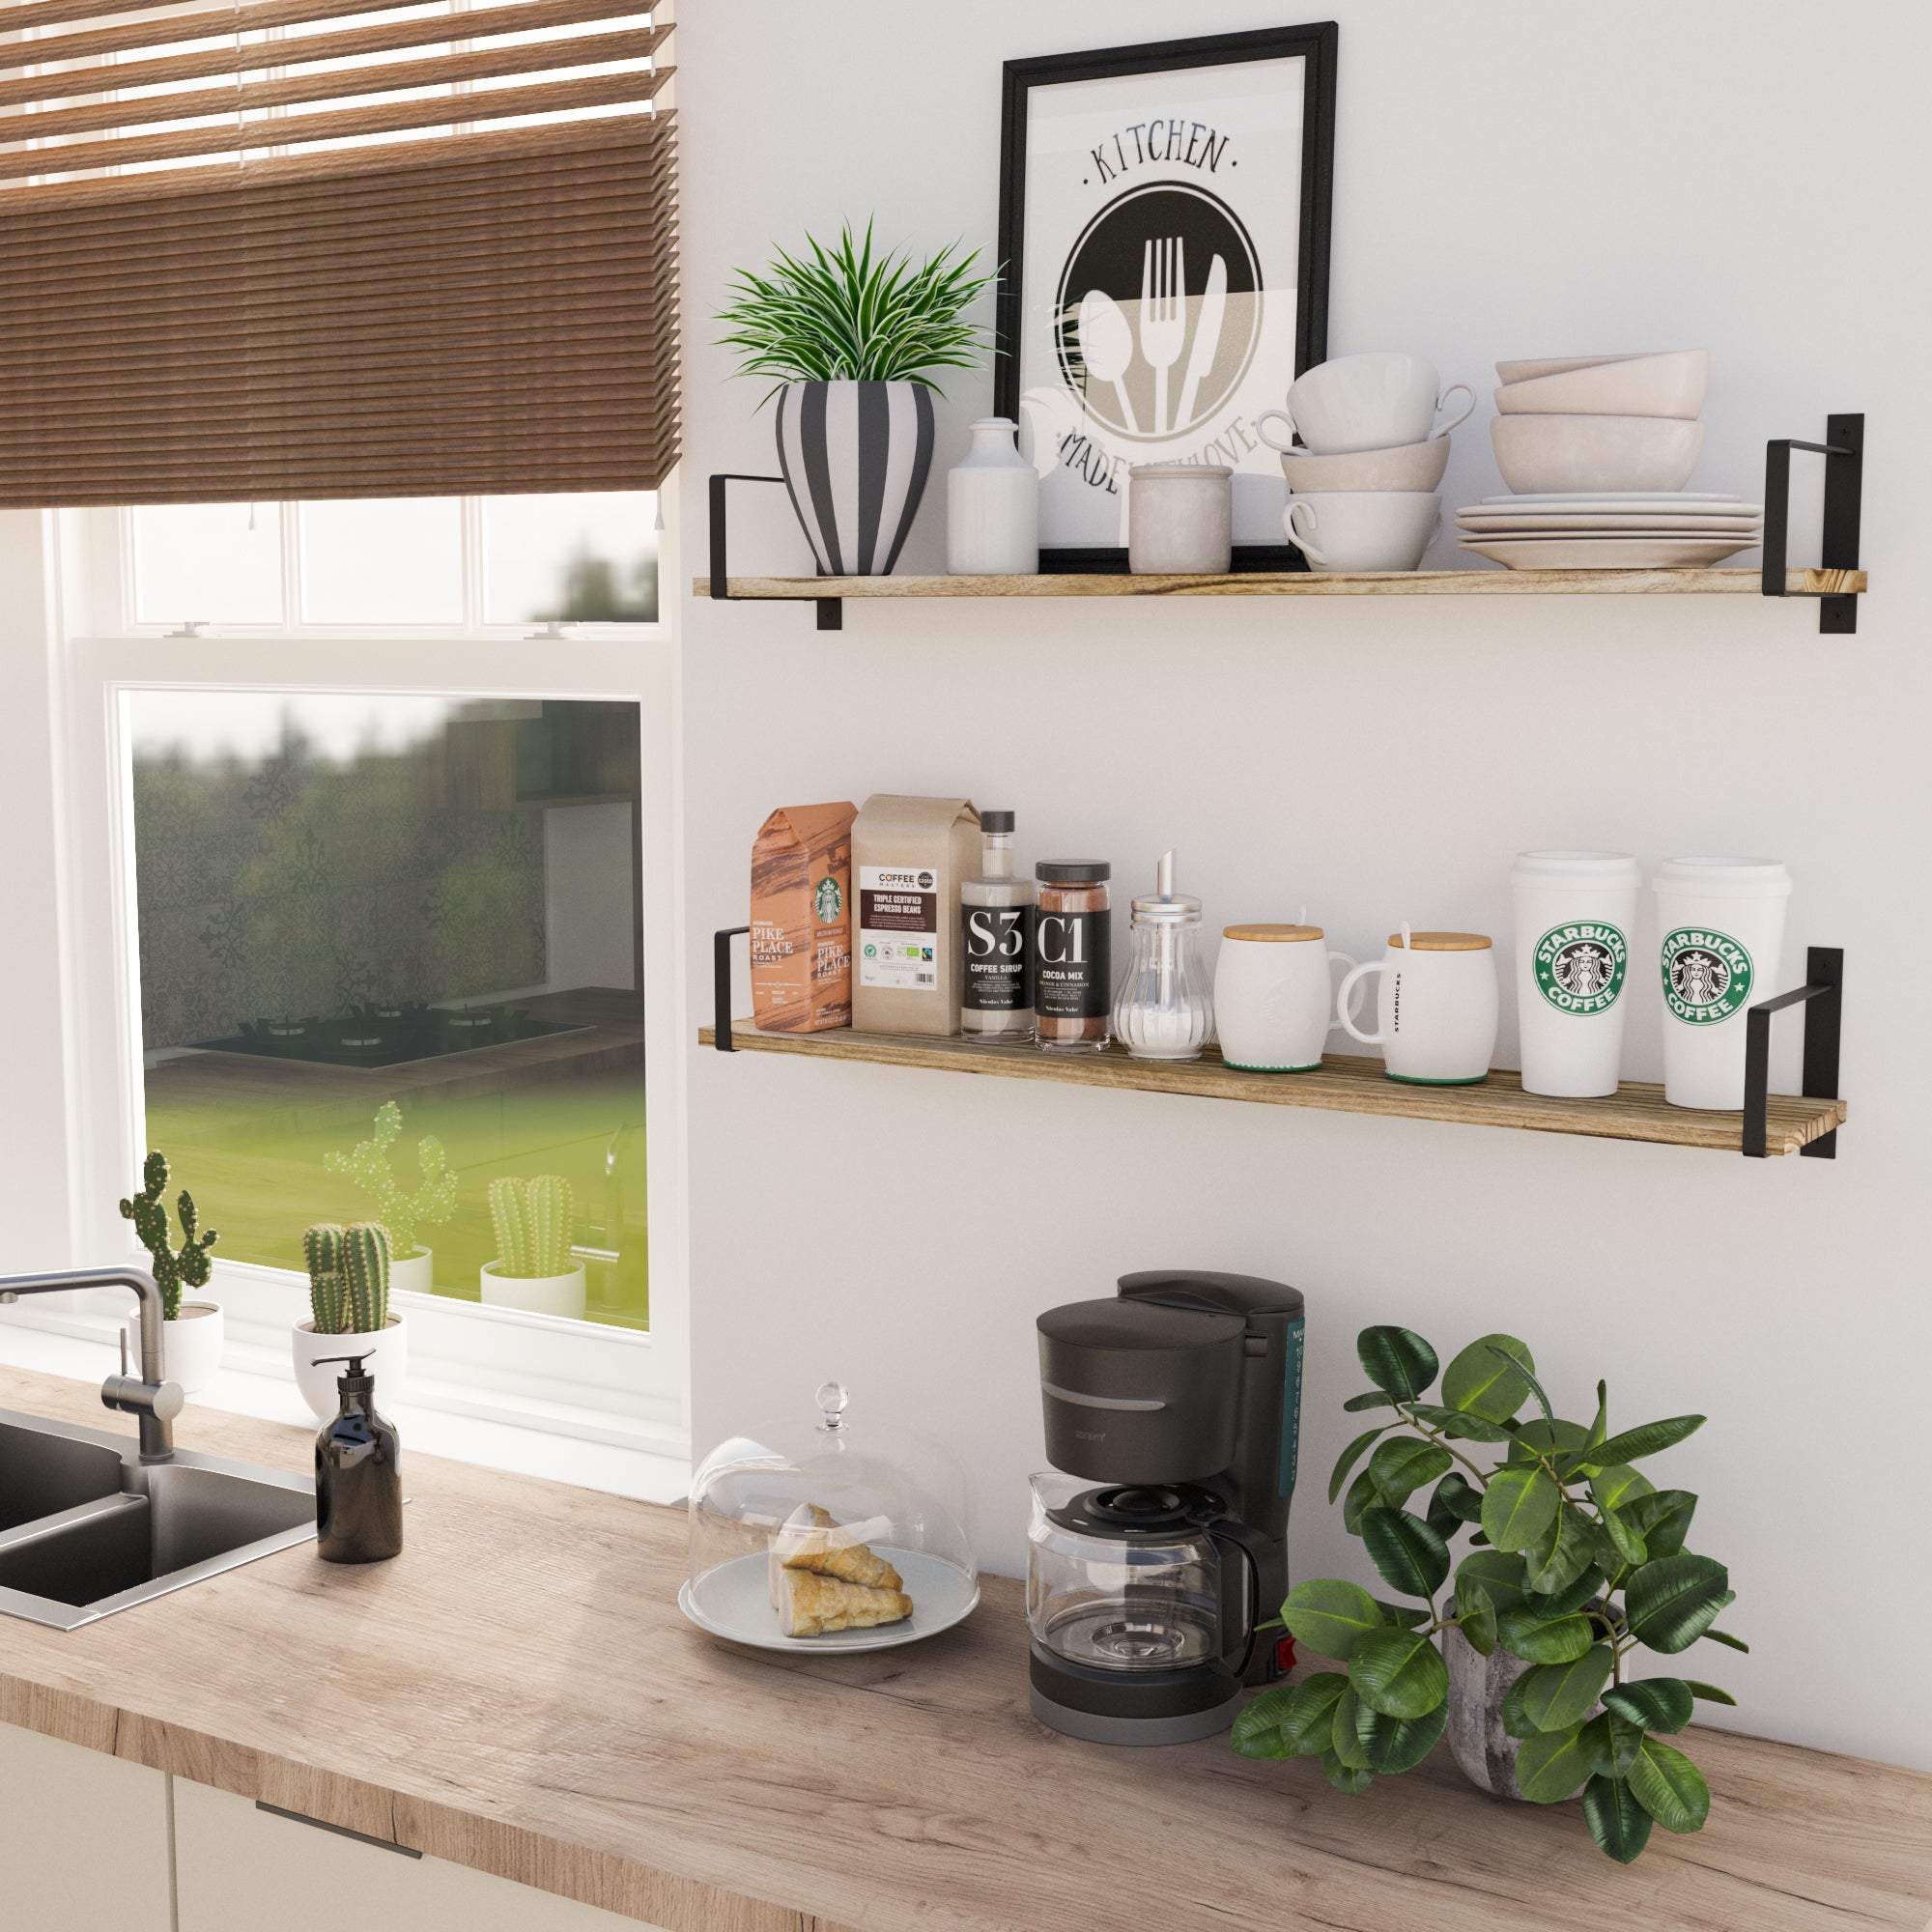 Kitchen setting with two kitchen storage shelves burnt color displaying plants, dishes, and coffee accessories by a window.